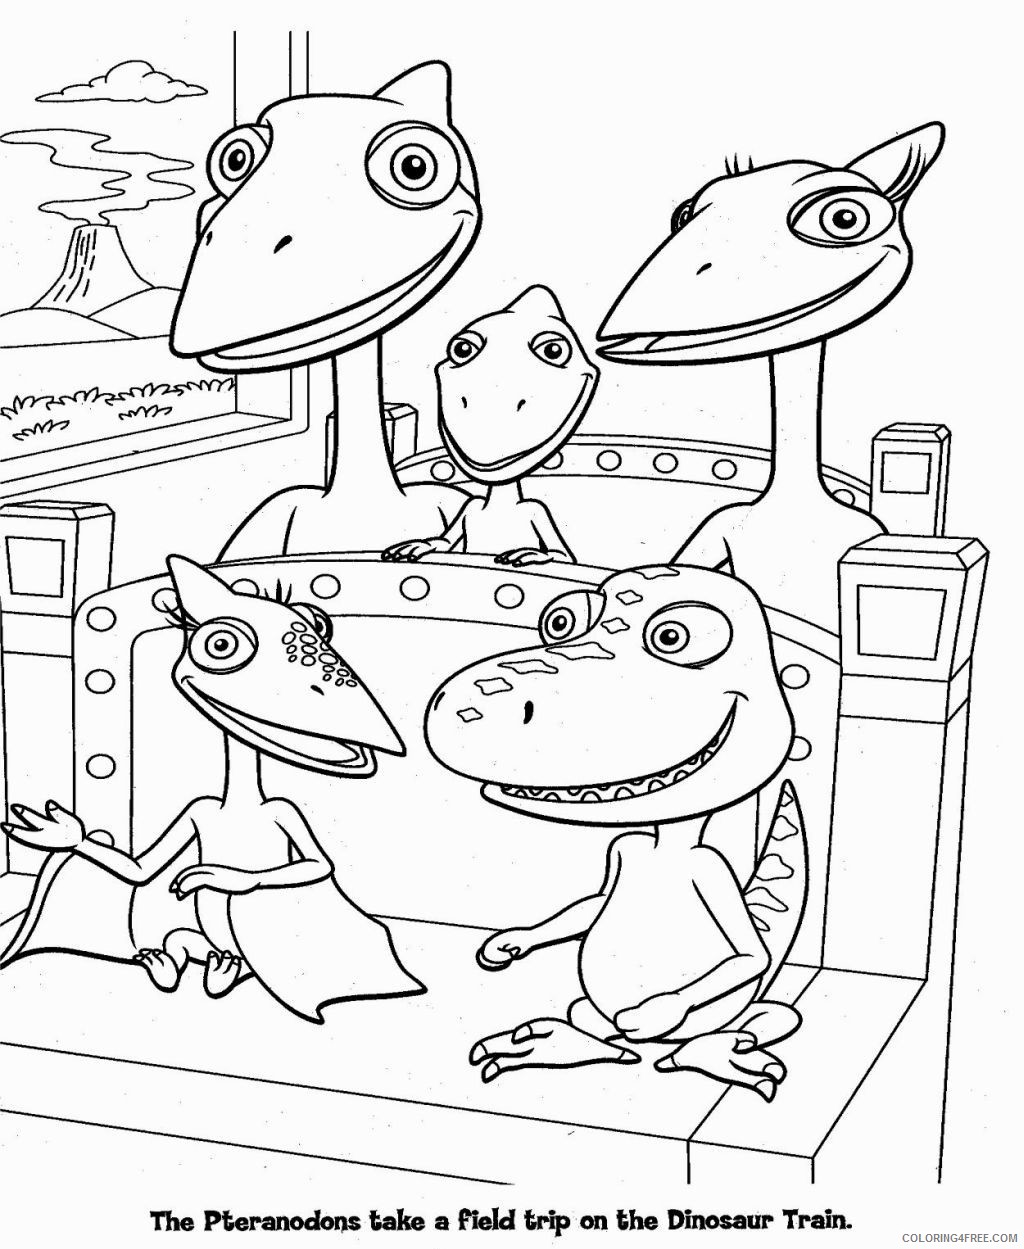 Dinosaur Train Coloring Pages Cartoons The Pteranodons Dinosaur Train Printable 2020 2275 Coloring4free